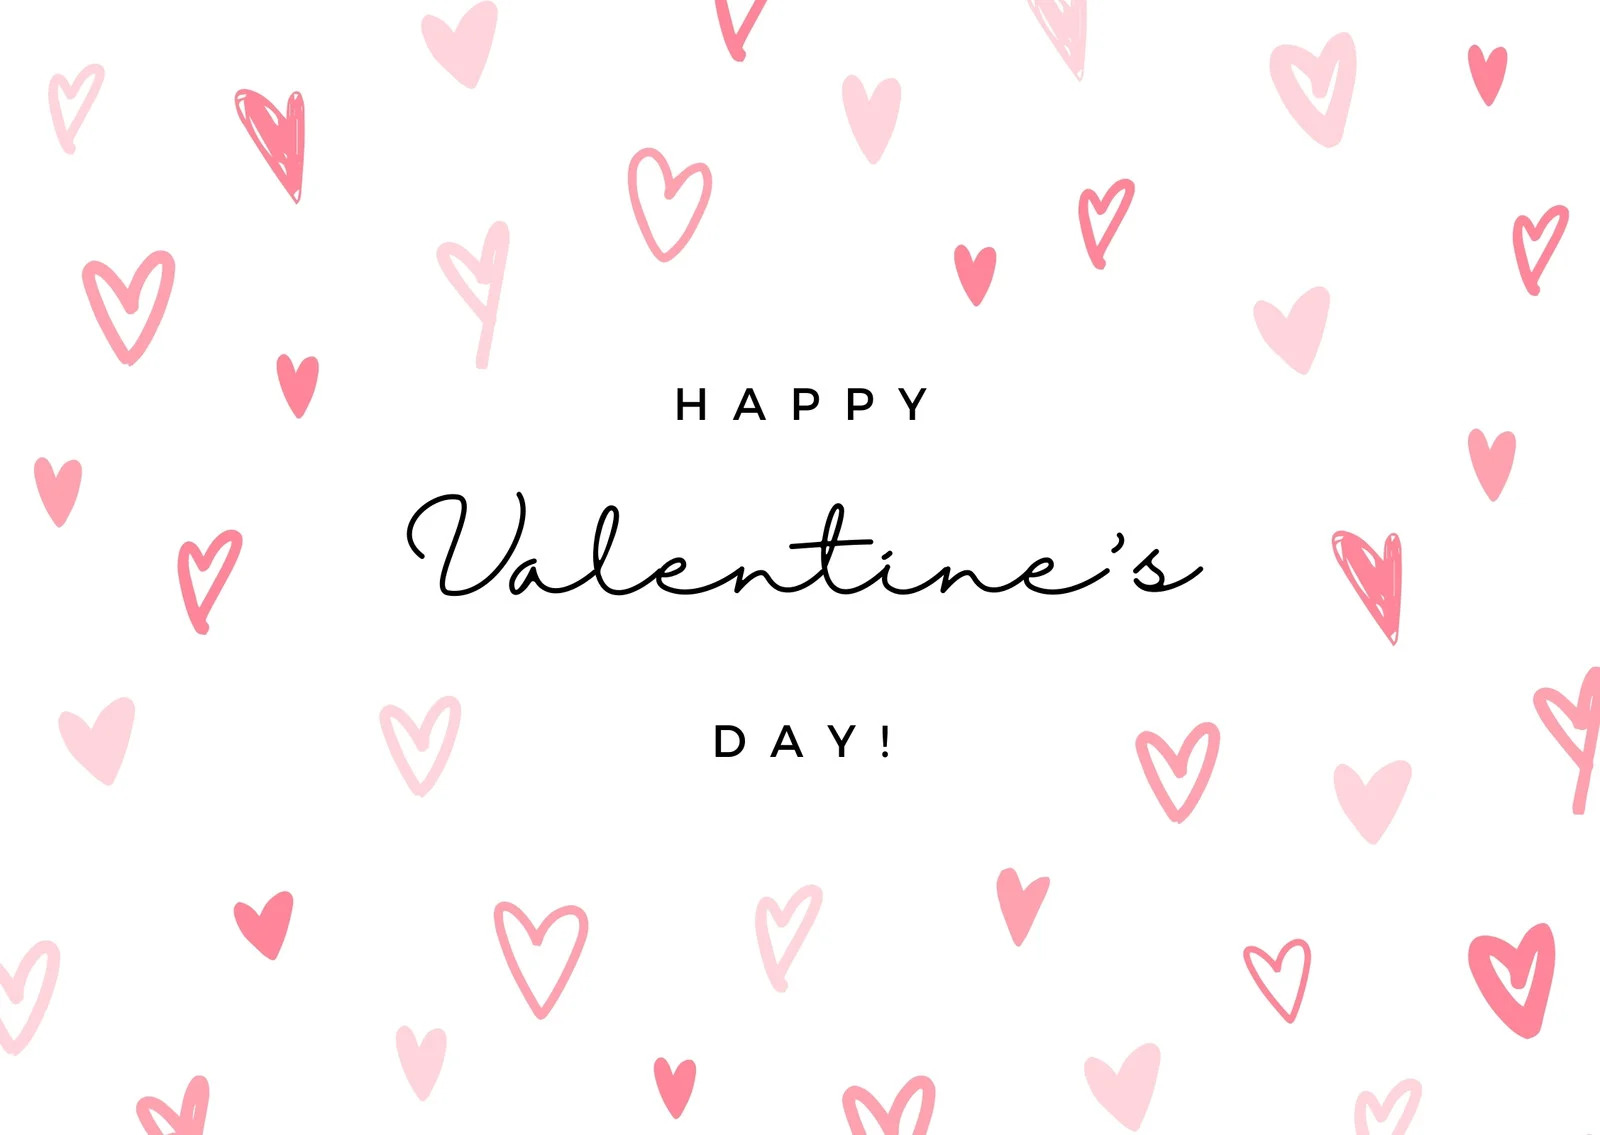 microsofts-best-valentines-day-templates-and-printables